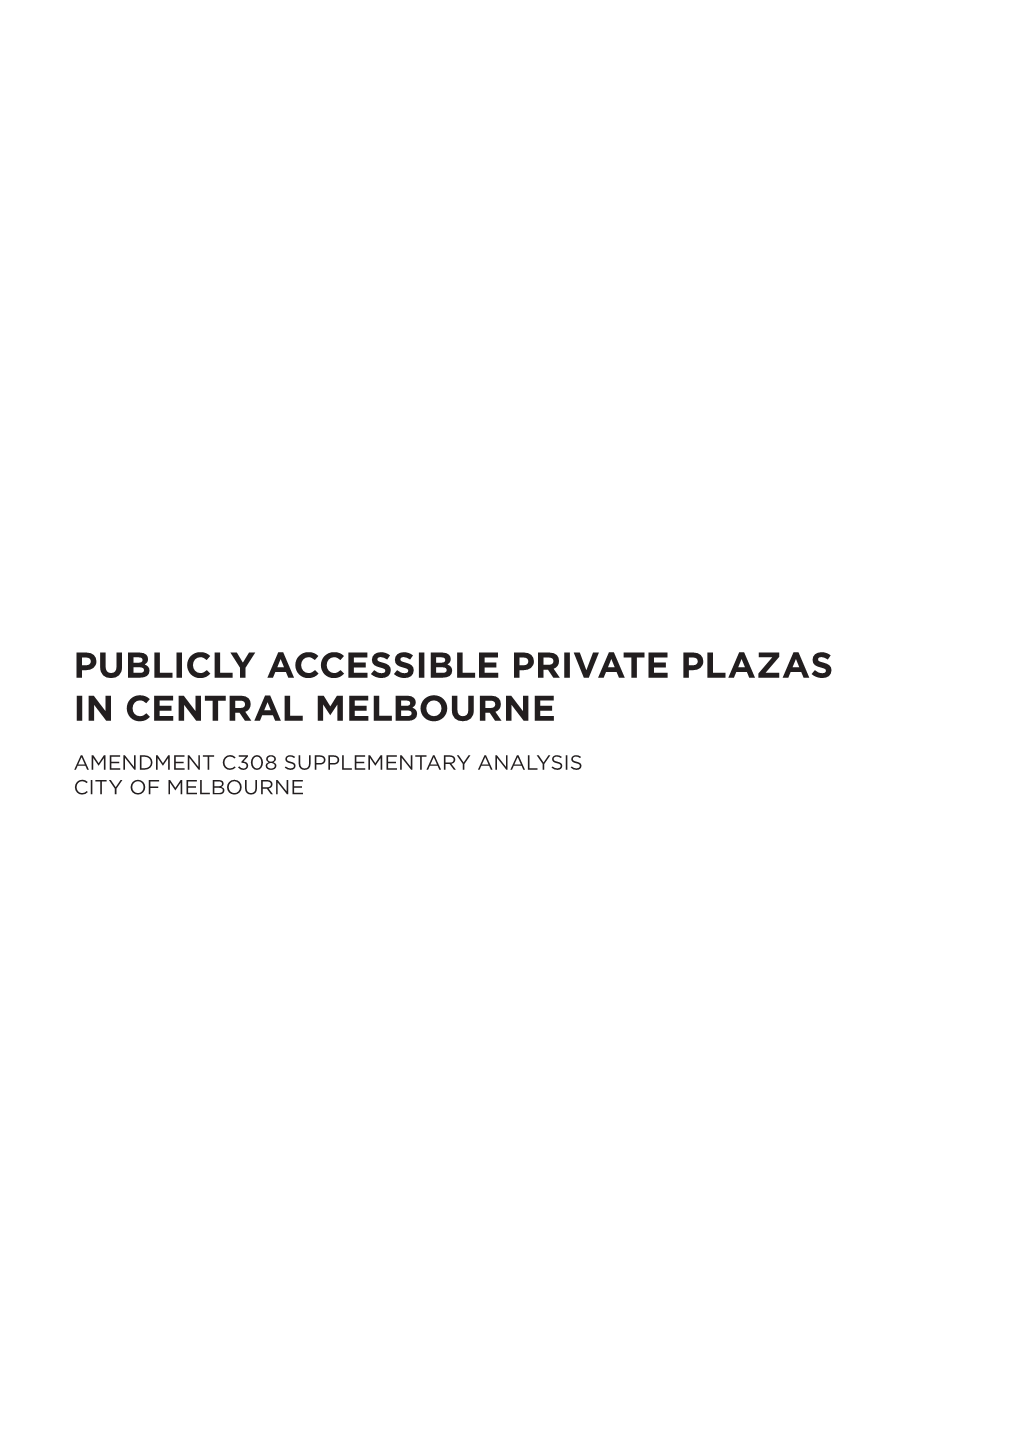 Publicly Accessible Private Plazas in Central Melbourne Amendment C308 Supplementary Analysis City of Melbourne Introduction